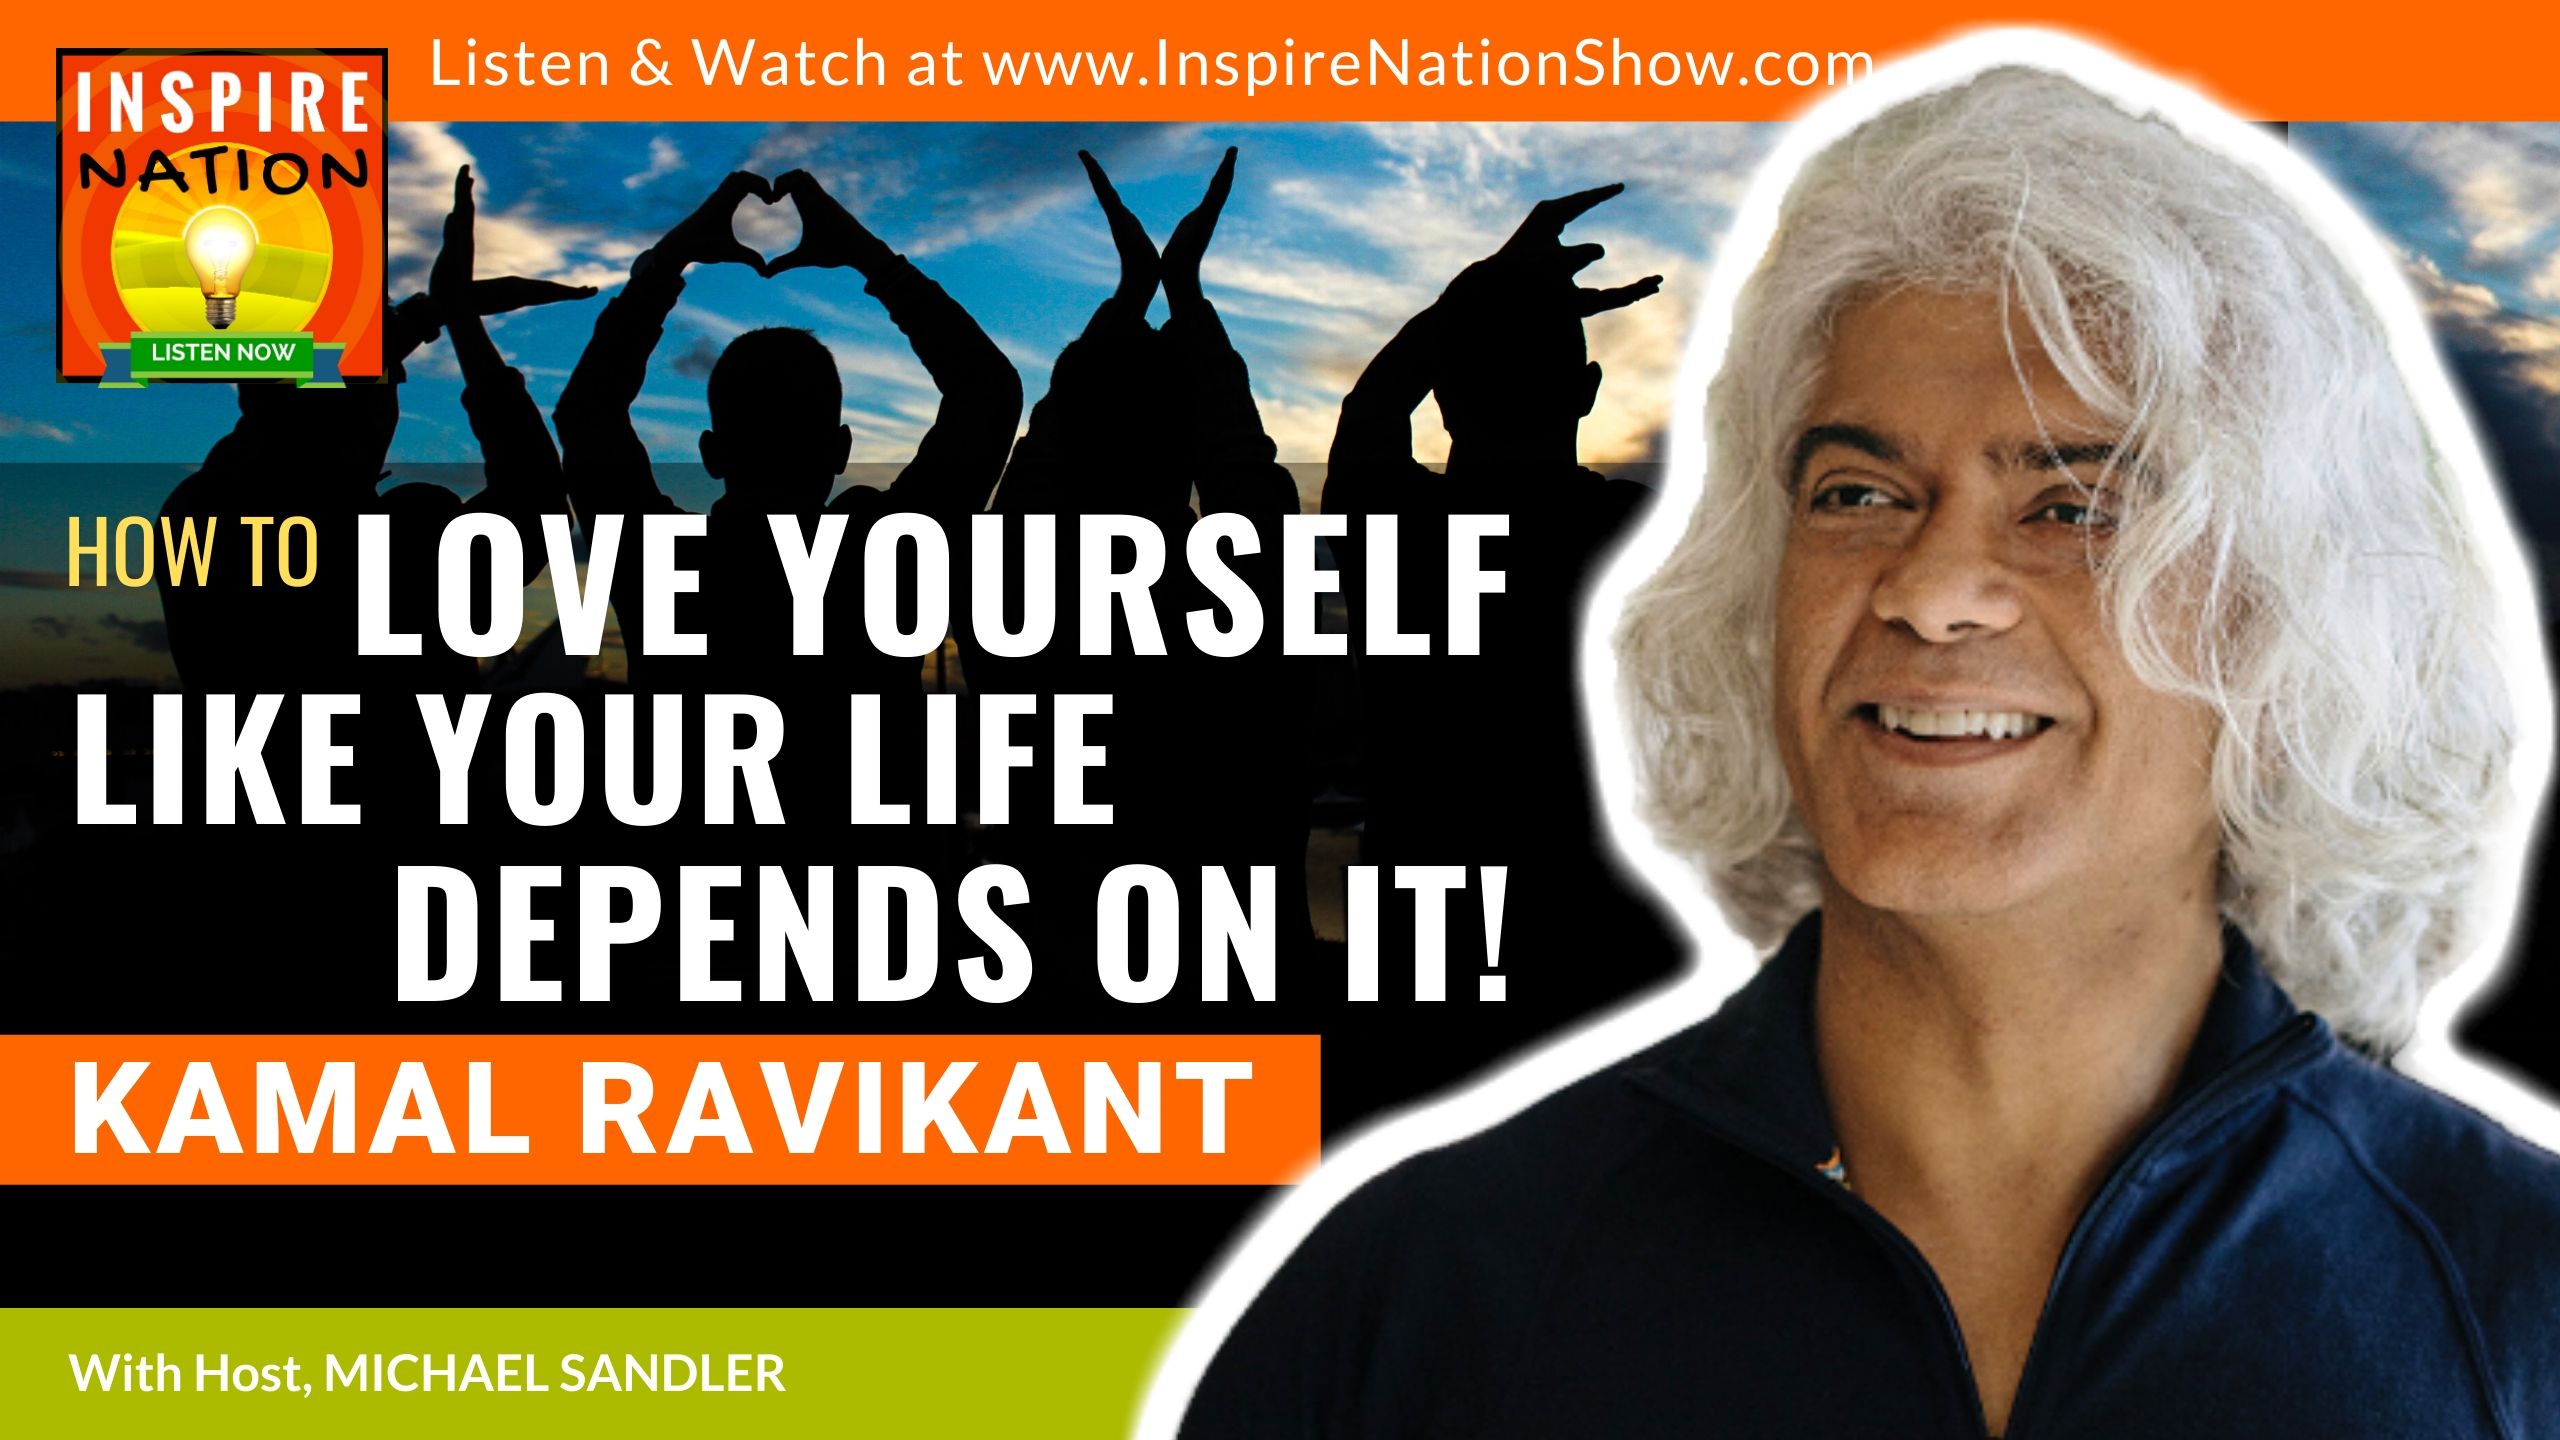 Kamal Ravikant-Love Yourself Like Your Life Depends on It-inspire nation show-spiritual-self help podcast